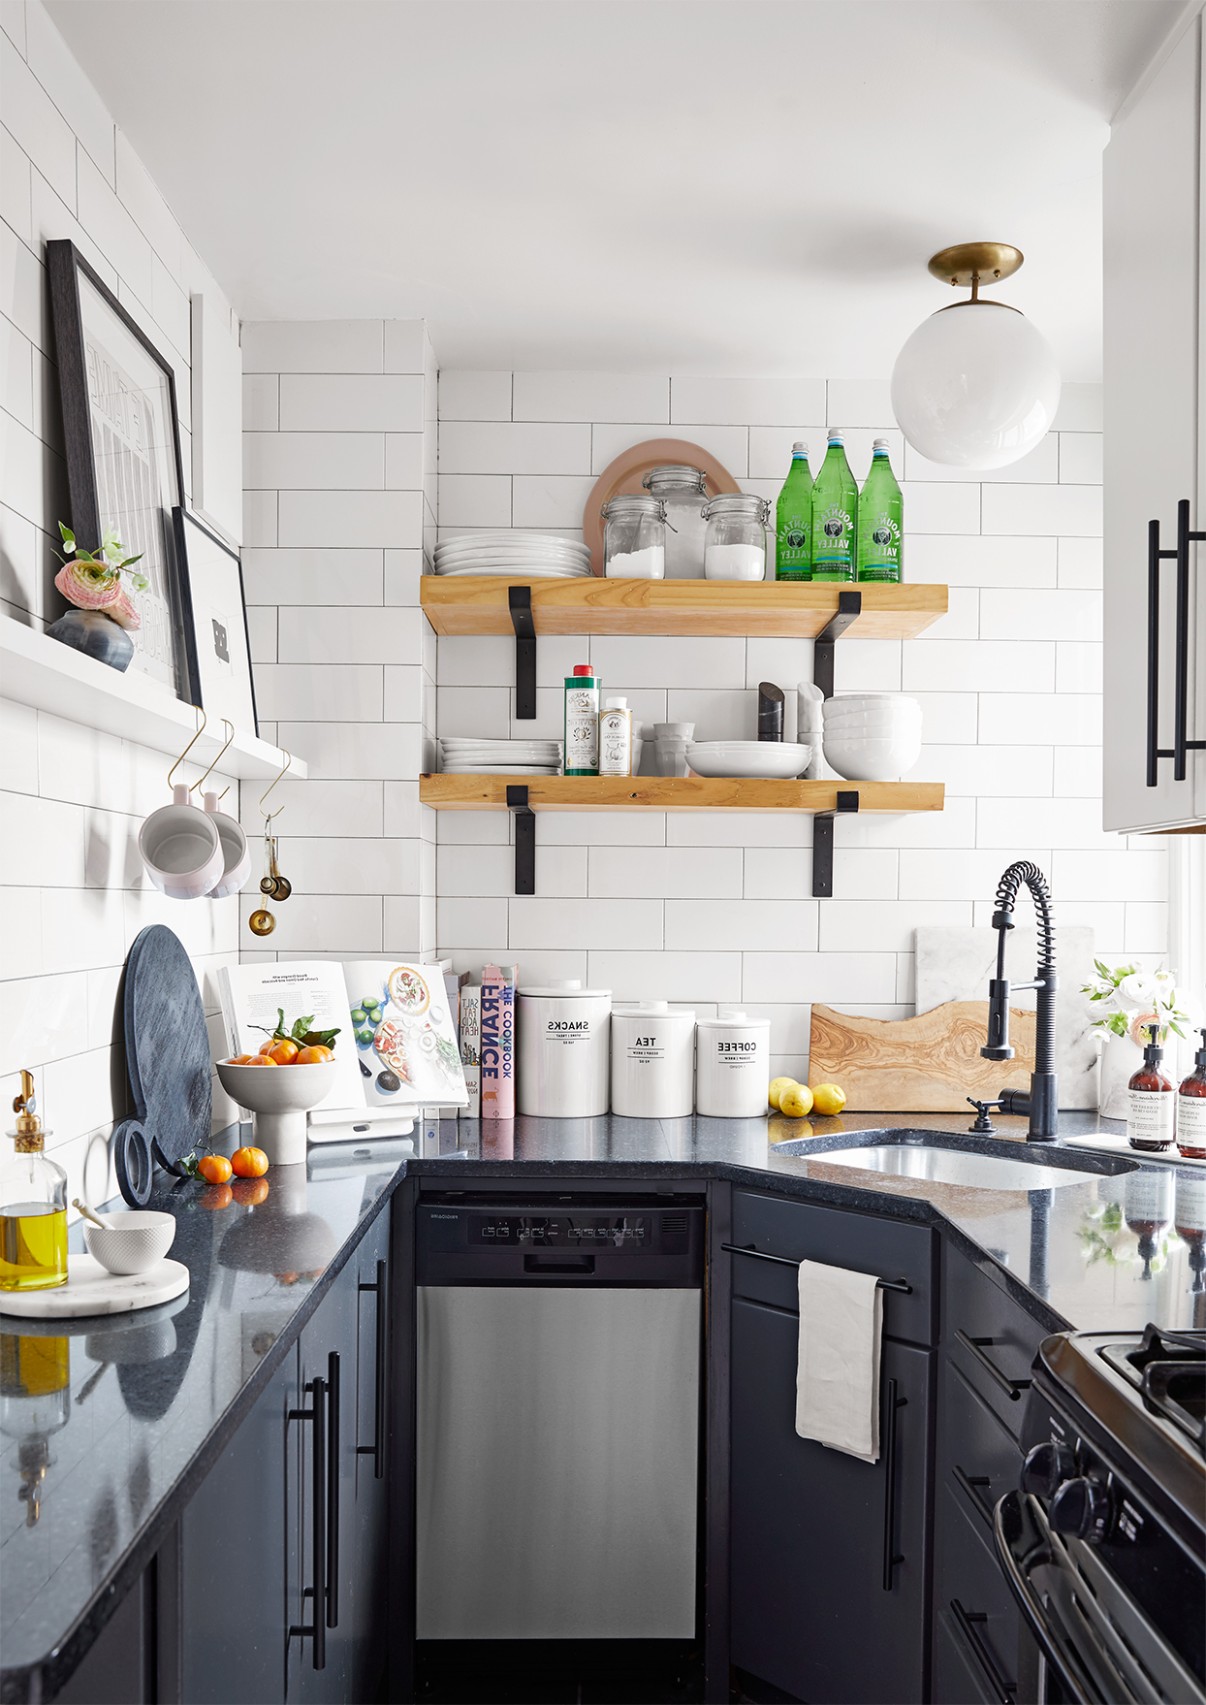 Small Kitchen Ideas You Will Want to Try Today - Decoholic - small kitchen planner